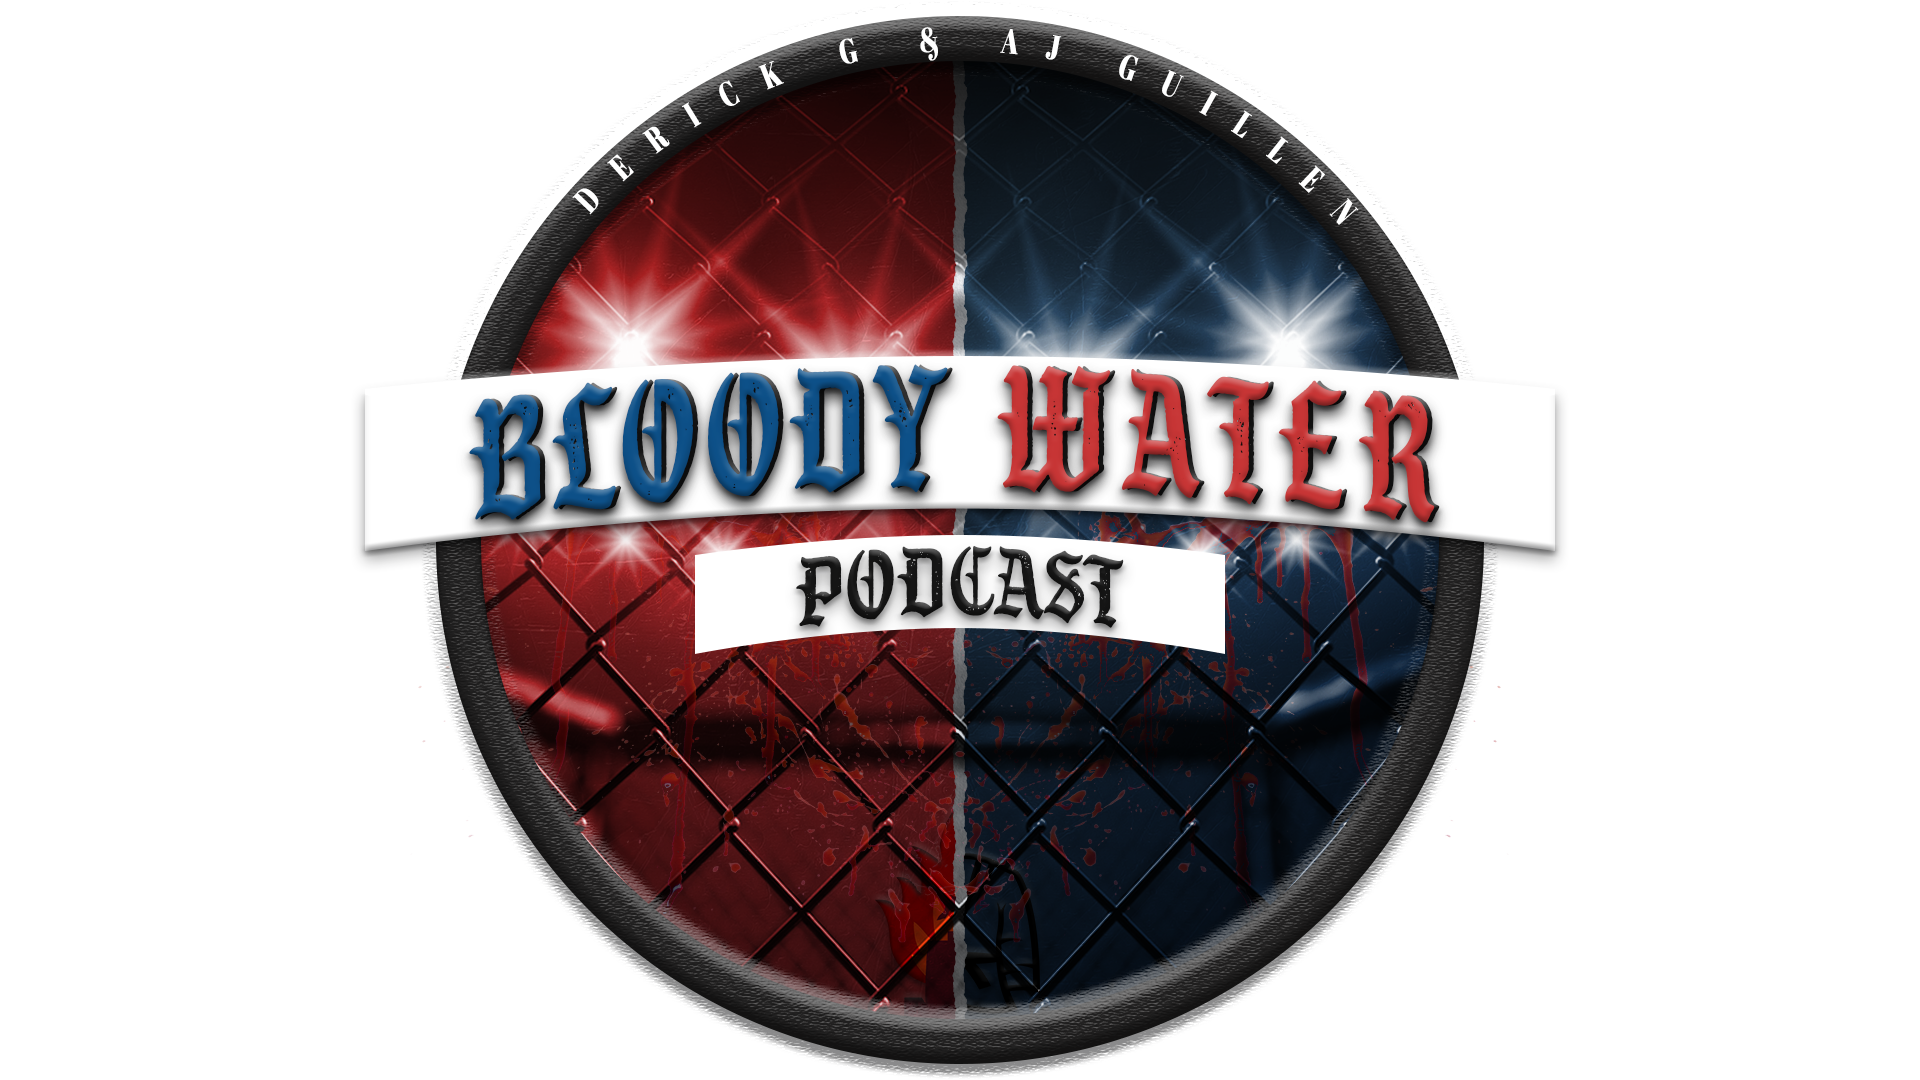 The Bloody Water Podcast